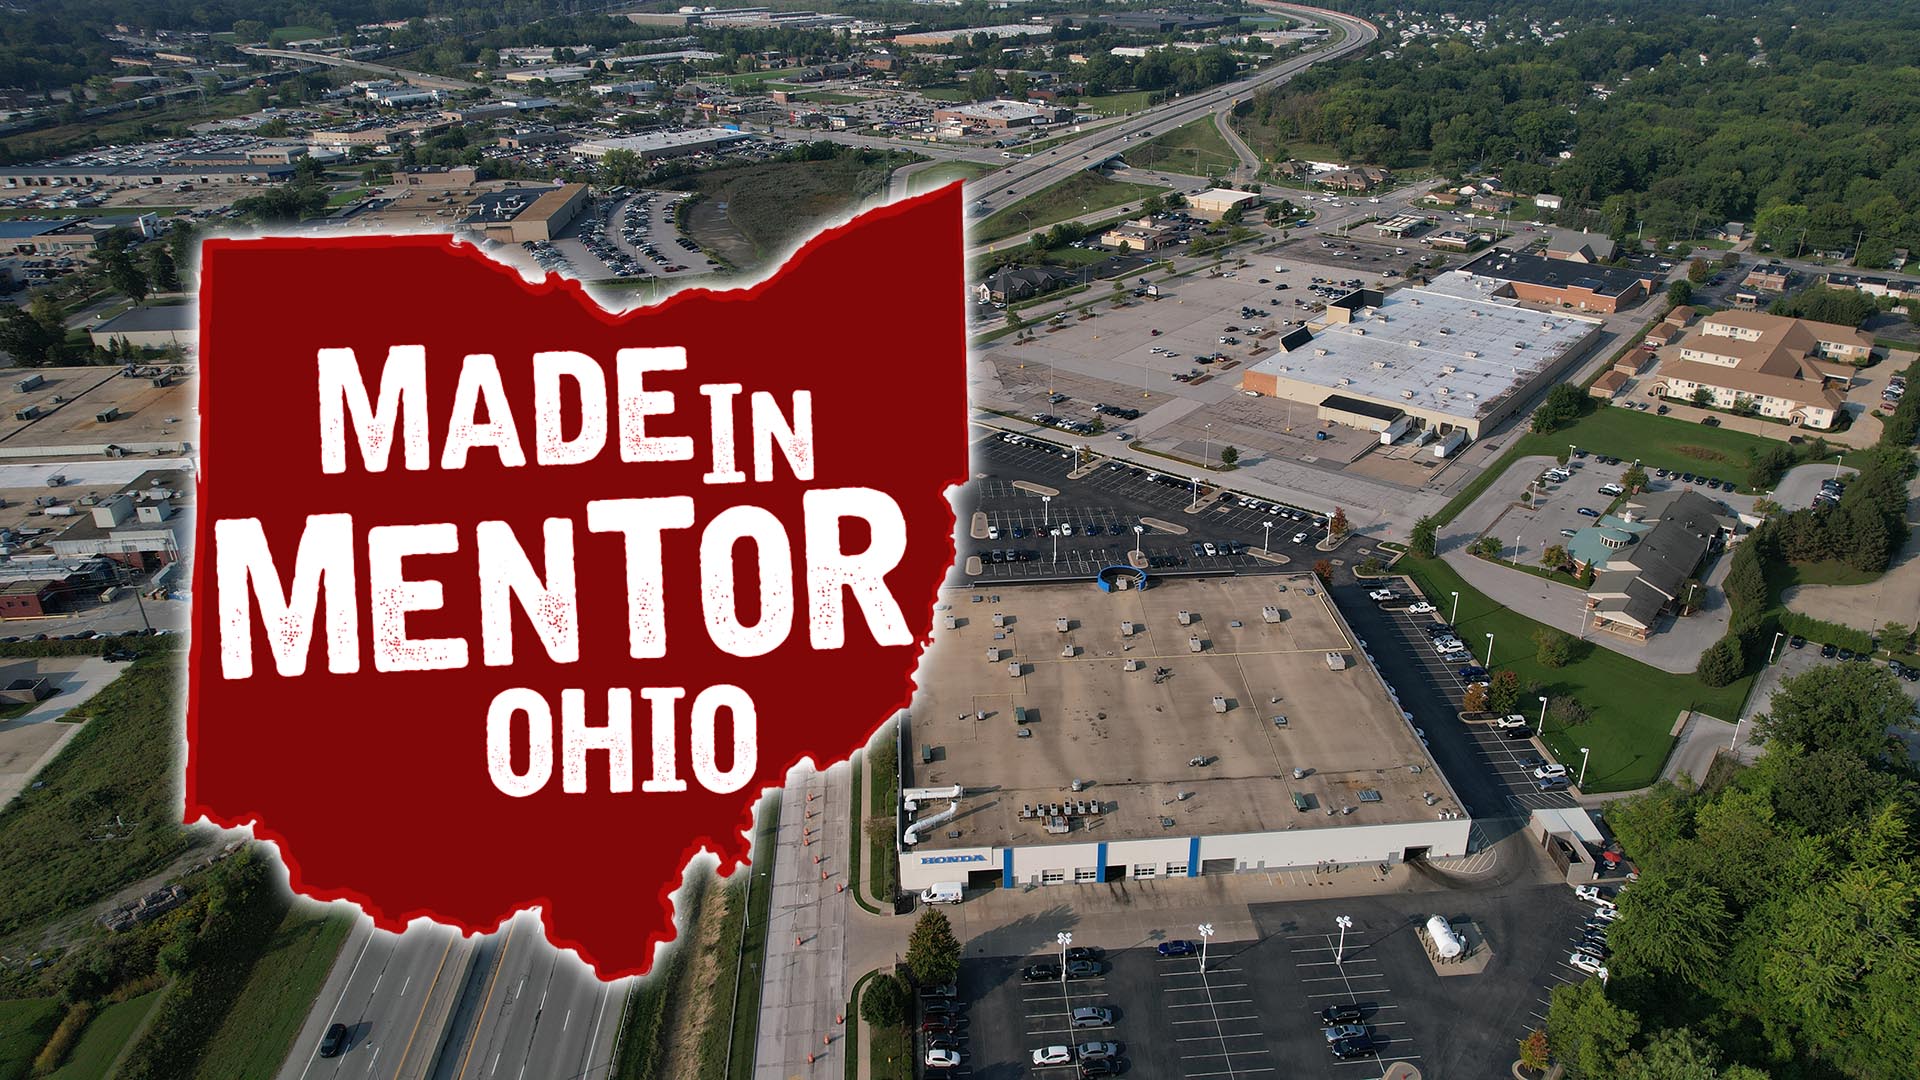 Aerial view of Mentor, Ohio's industrial corridor with the Made in Mentor logo superimposed on it.